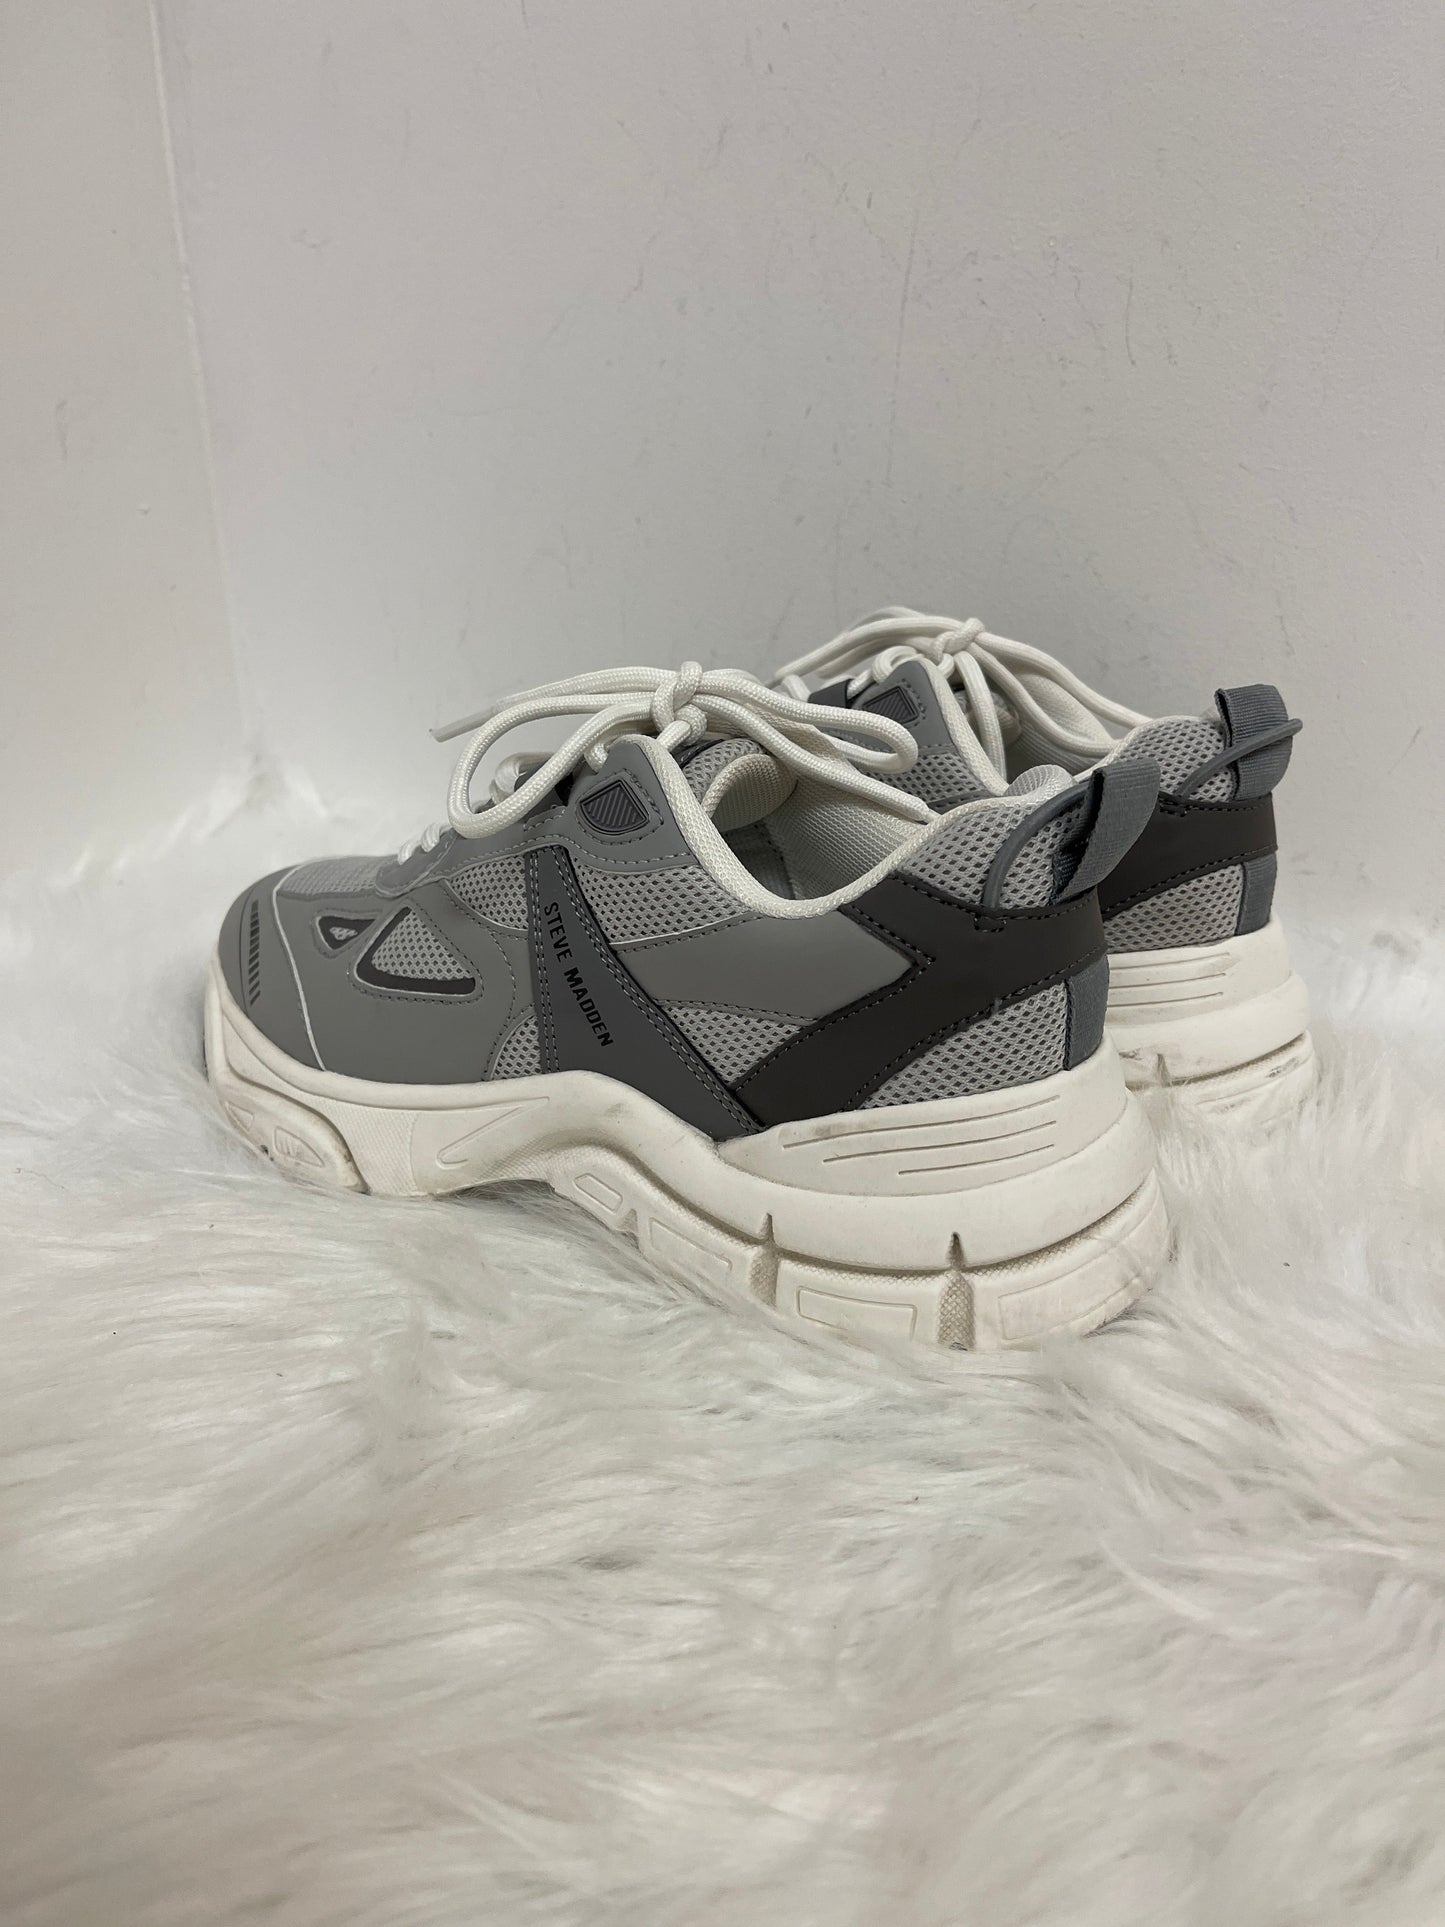 Grey Shoes Sneakers Steve Madden, Size 8.5